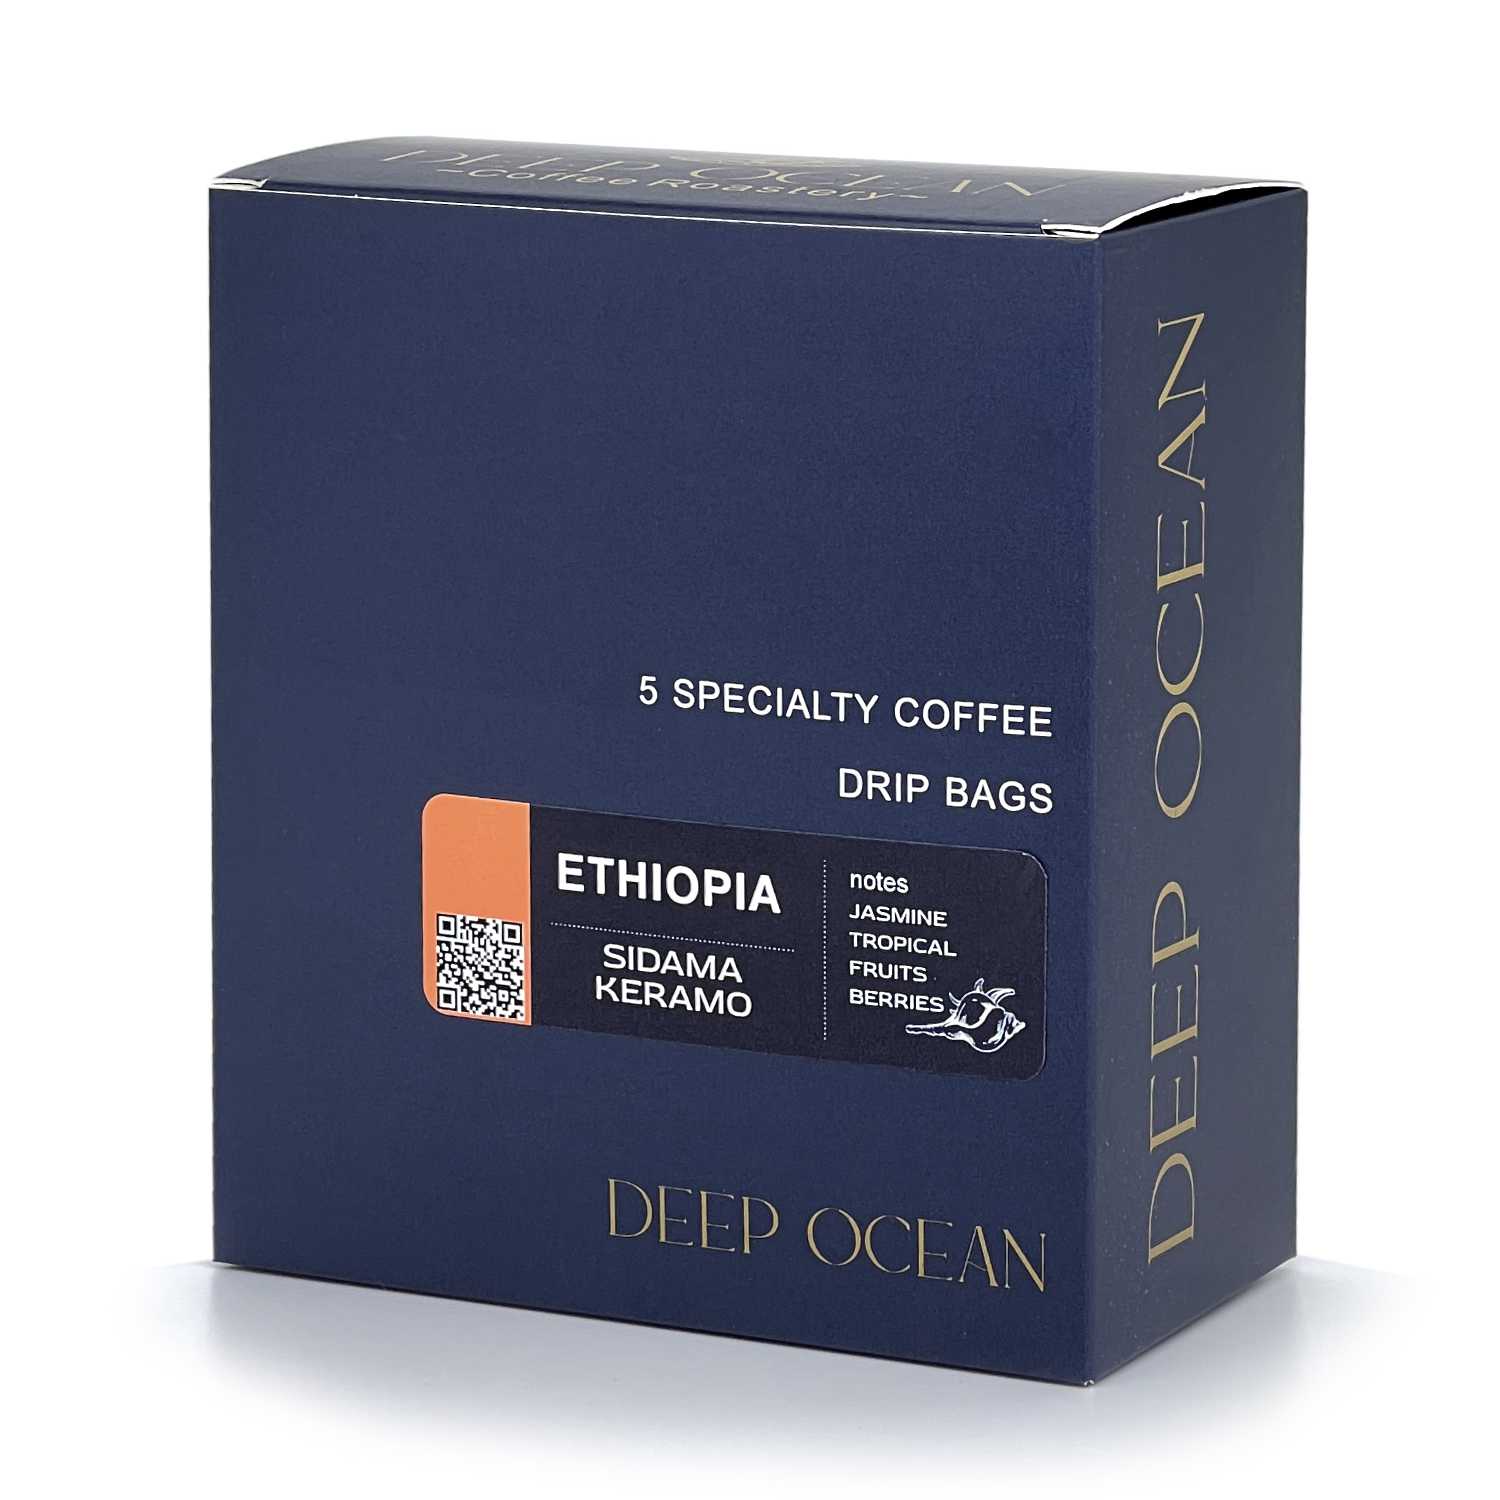 variant 1 - light roasted coffee Ethiopia in drip boxes is great choice of specialty coffee.